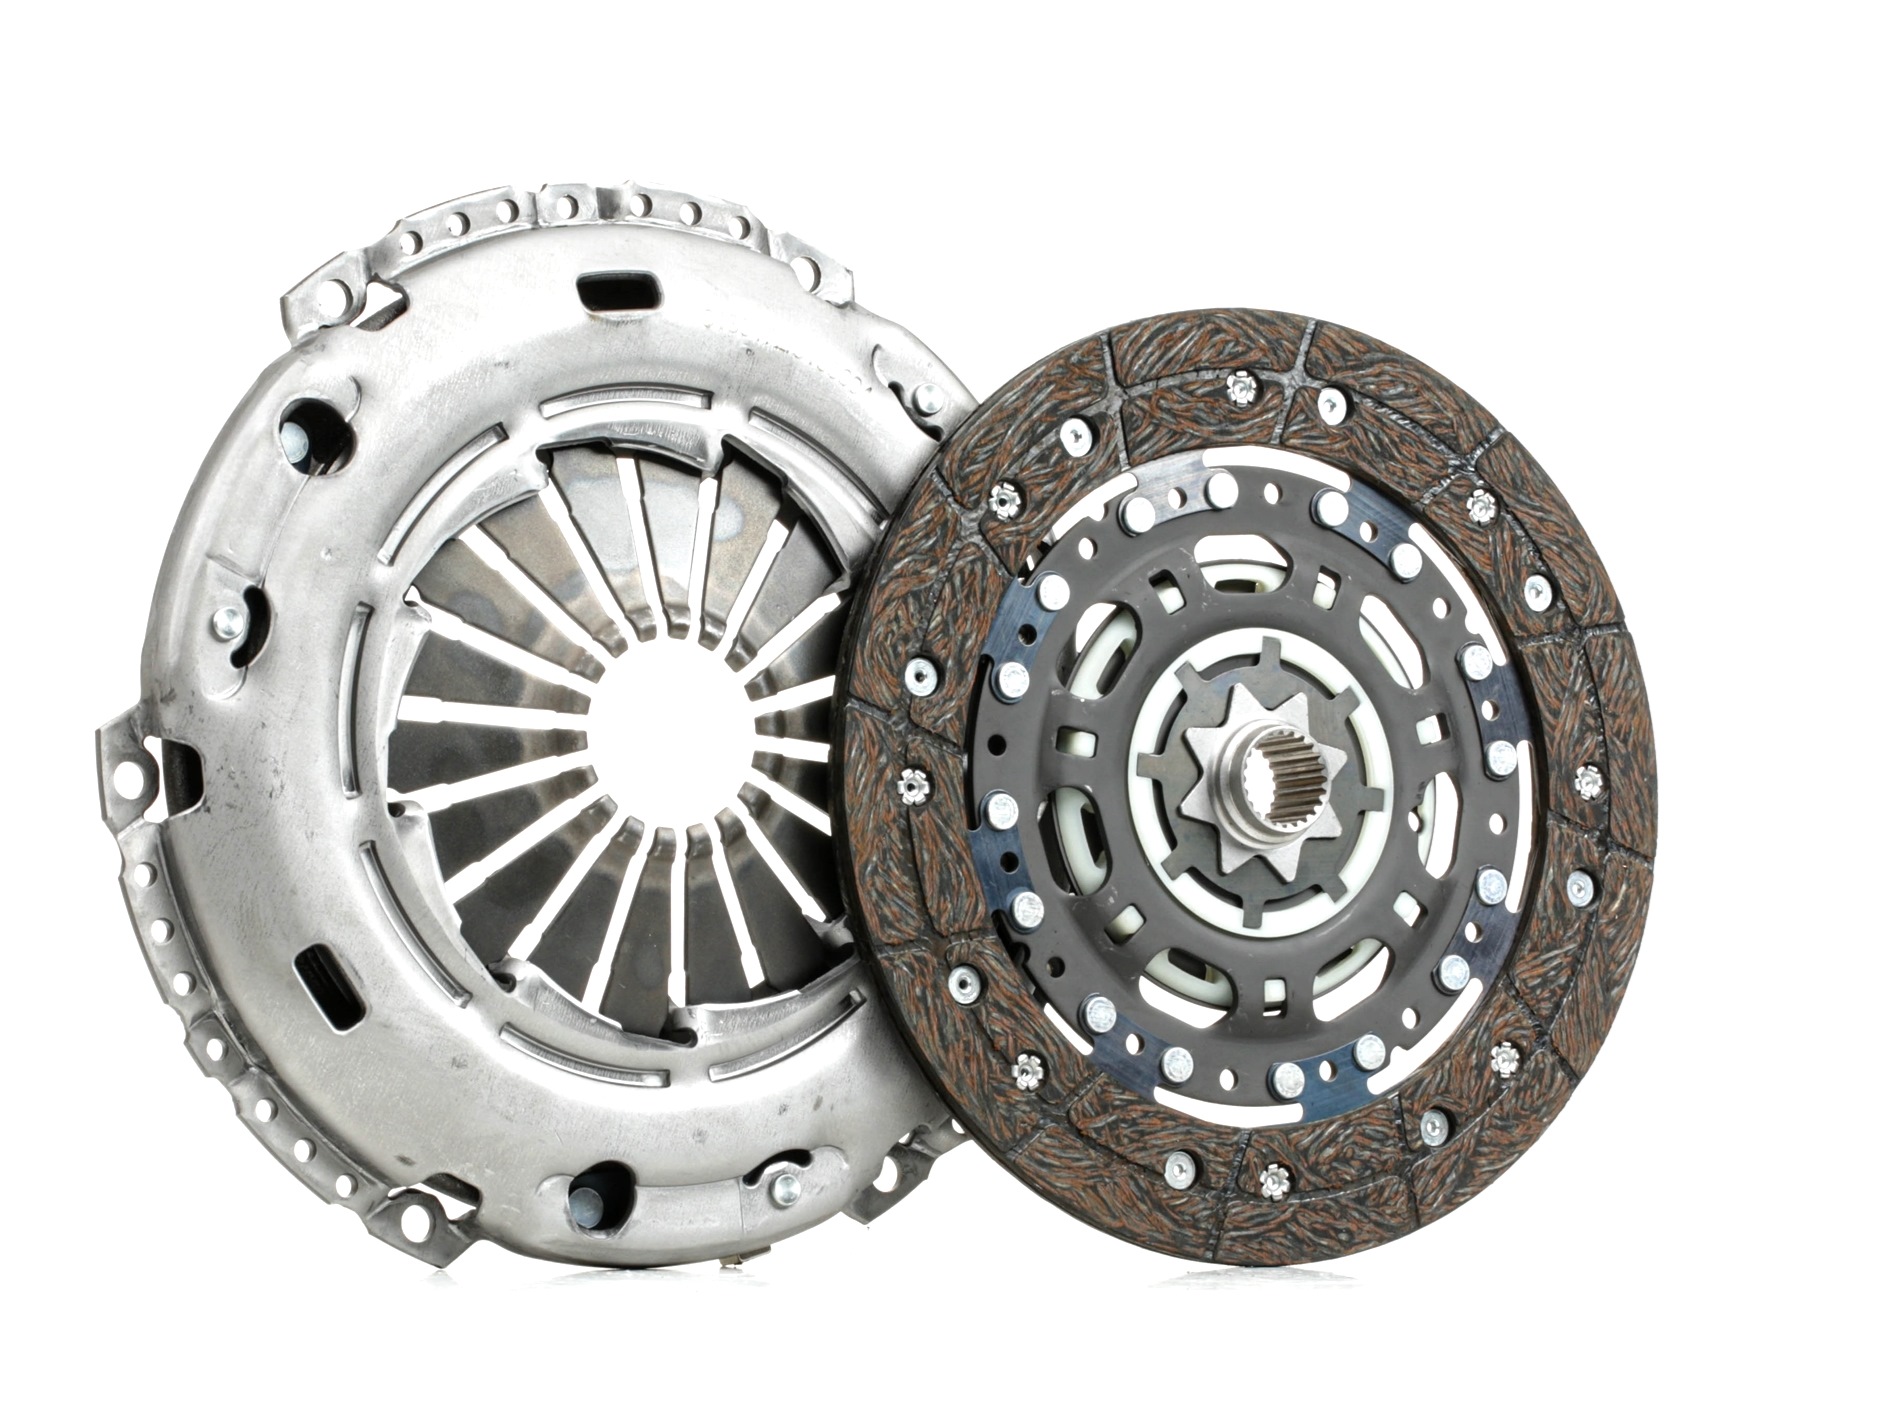 STARK SKCK-0100164 Clutch kit for engines with dual-mass flywheel, without clutch release bearing, Check and replace dual-mass flywheel if necessary., 240mm